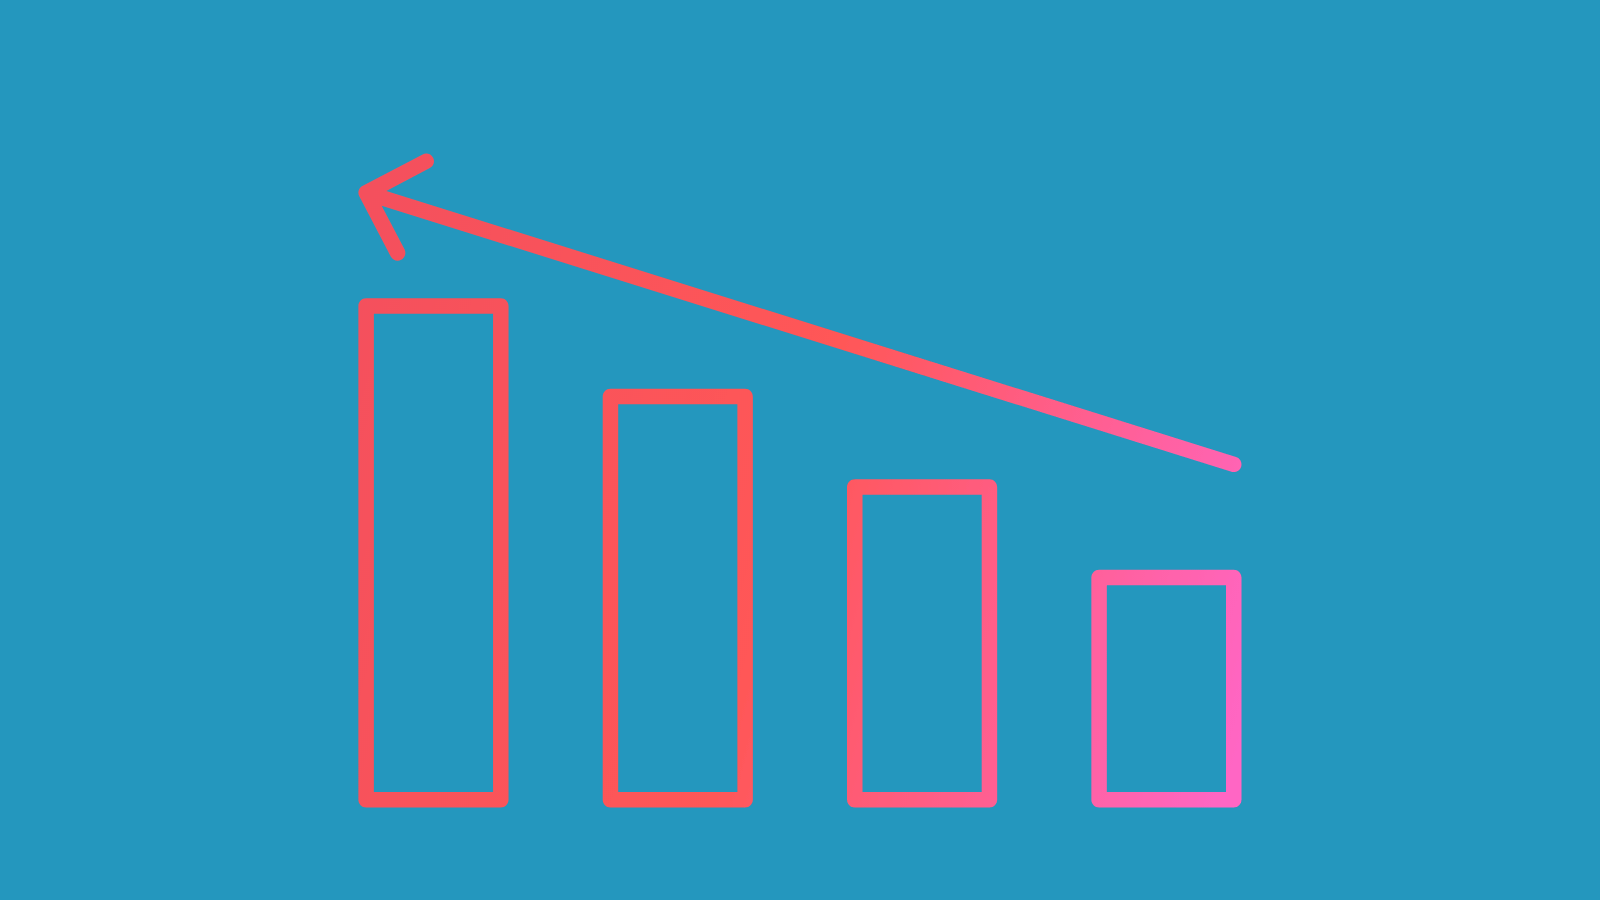 A bar graph with an arrow pointing up